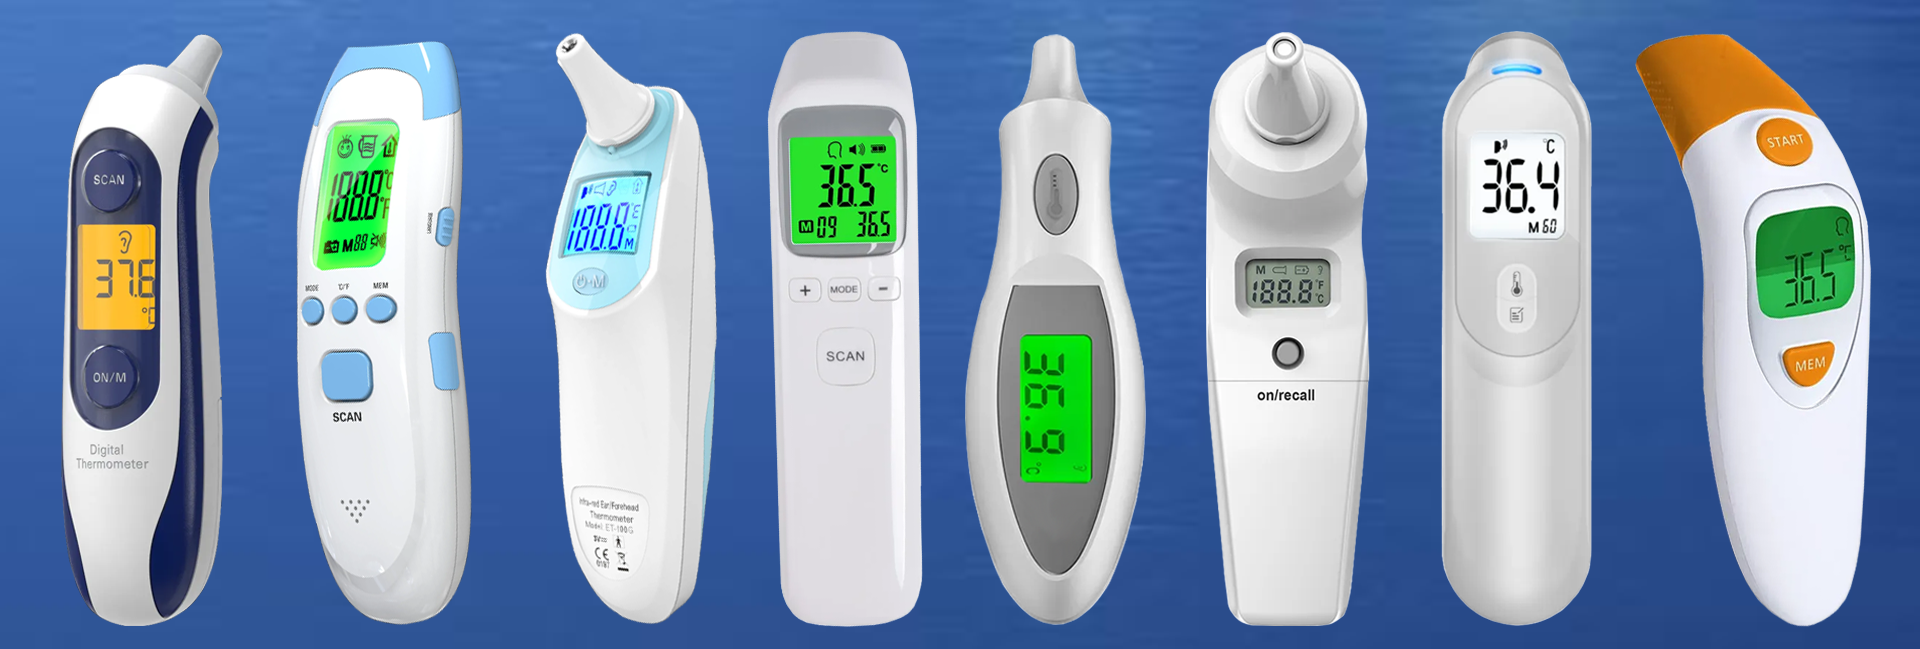 Infrared Ear thermometer-5-1